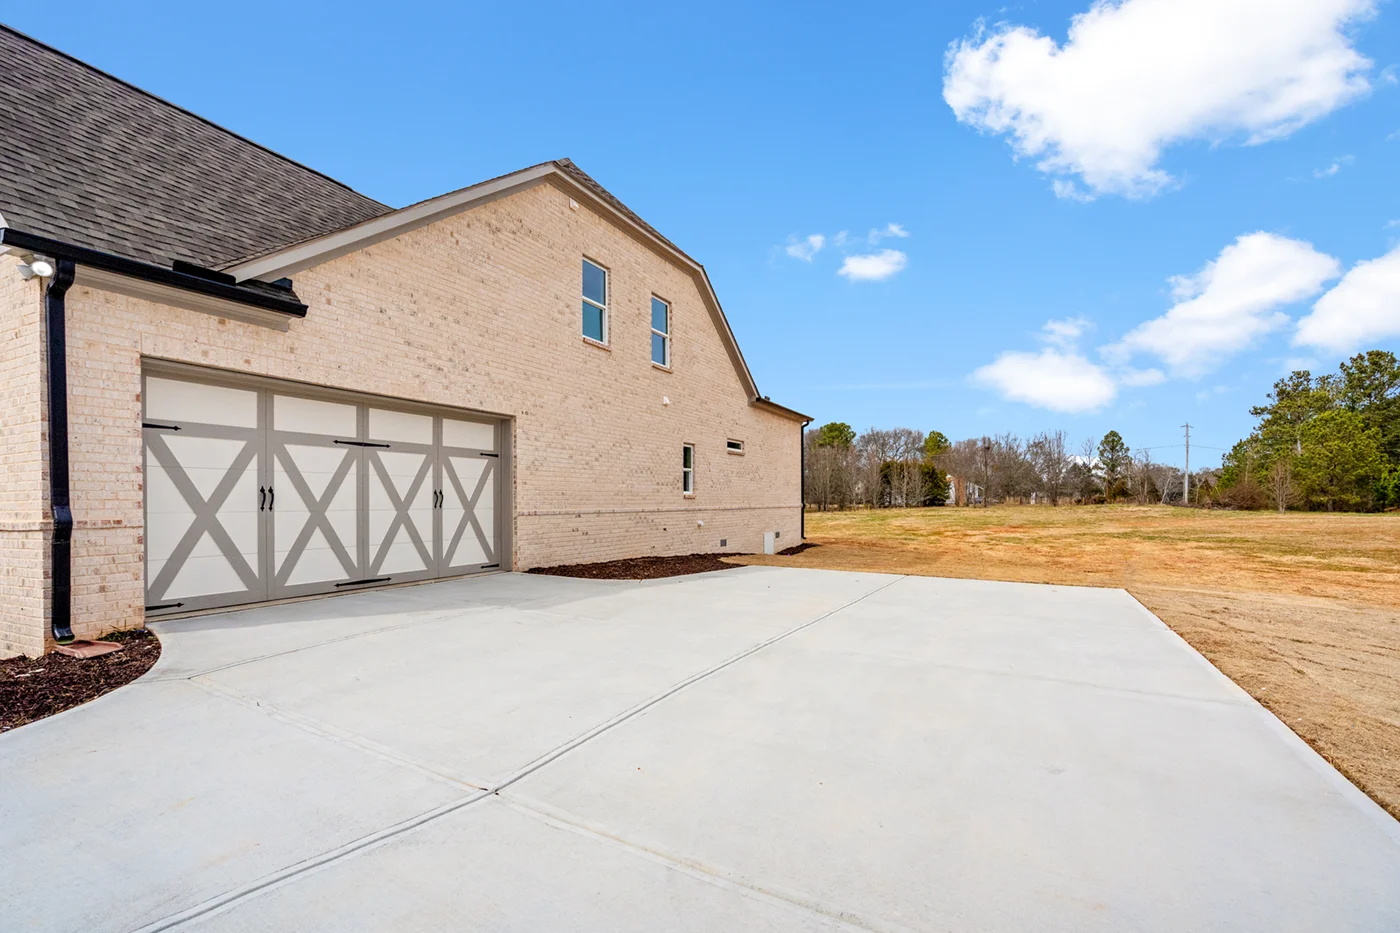 1300 Stonewood Field Rd. Watkinsville, GA | Stonewood Community | Single-Family Home for Sale by SR Homes | Stonewood Community | Single-Family Home for Sale by SR Homes